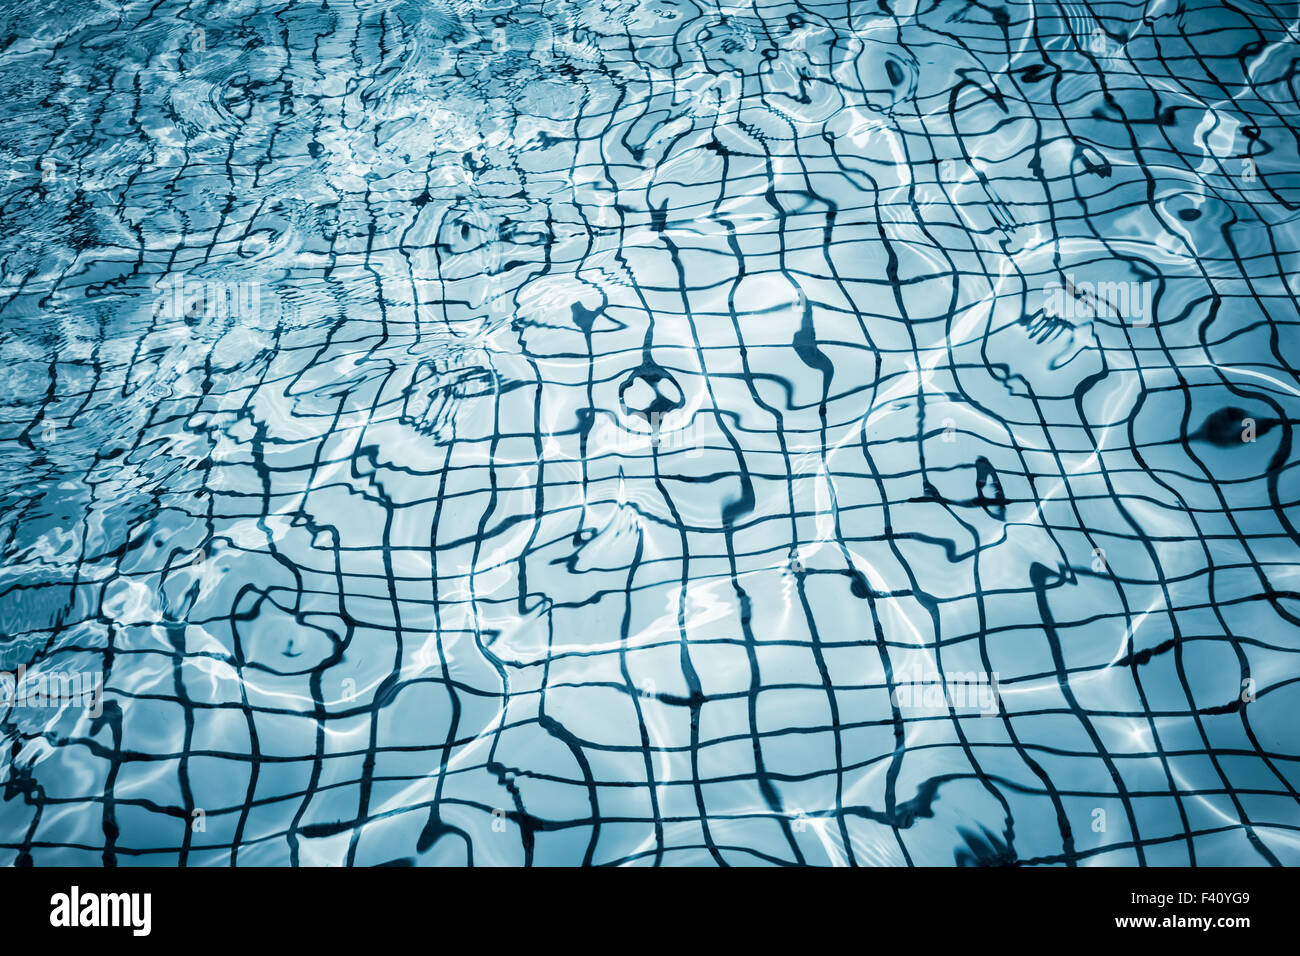 water surface of the pool background Stock Photo